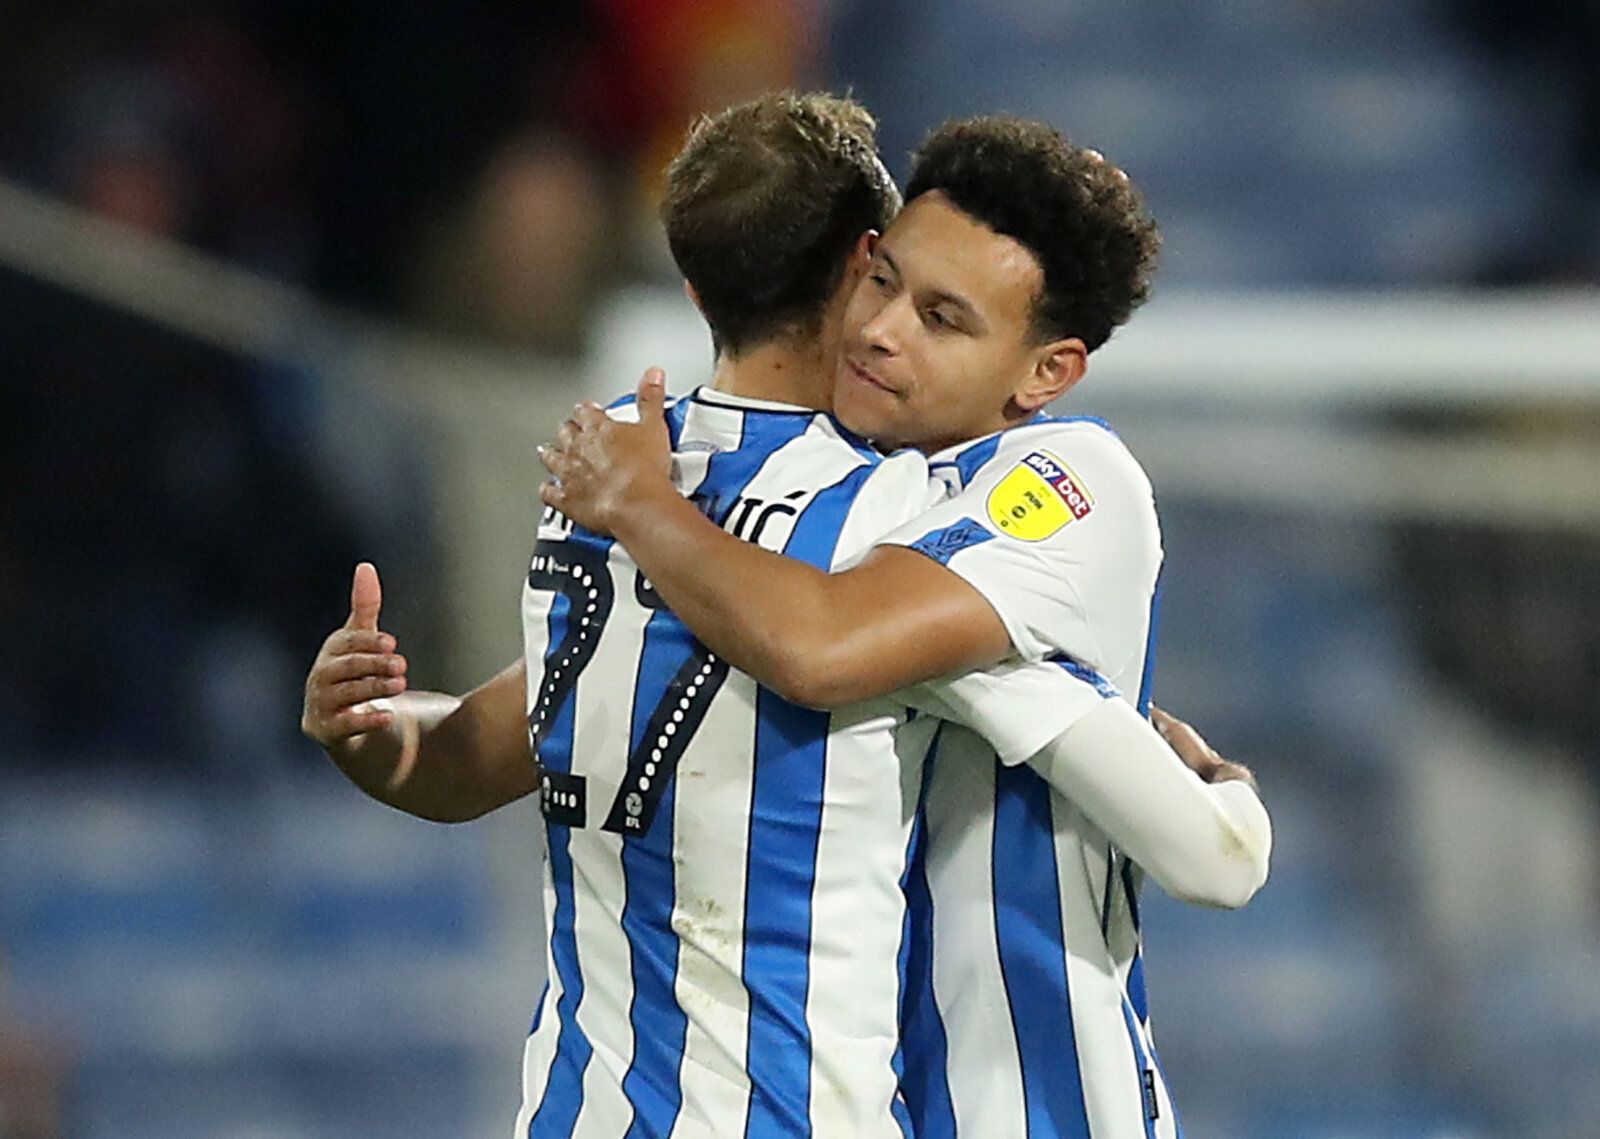 Soccer Football - Championship - Huddersfield Town v Blackburn Rovers - John Smith's Stadium, Huddersfield, Britain - December 29, 2019   Huddersfield Town's Jon Gorenc Stankovic and Rarmani Edmonds-Green celebrate after the match   Action Images/John Clifton    EDITORIAL USE ONLY. No use with unauthorized audio, video, data, fixture lists, club/league logos or 